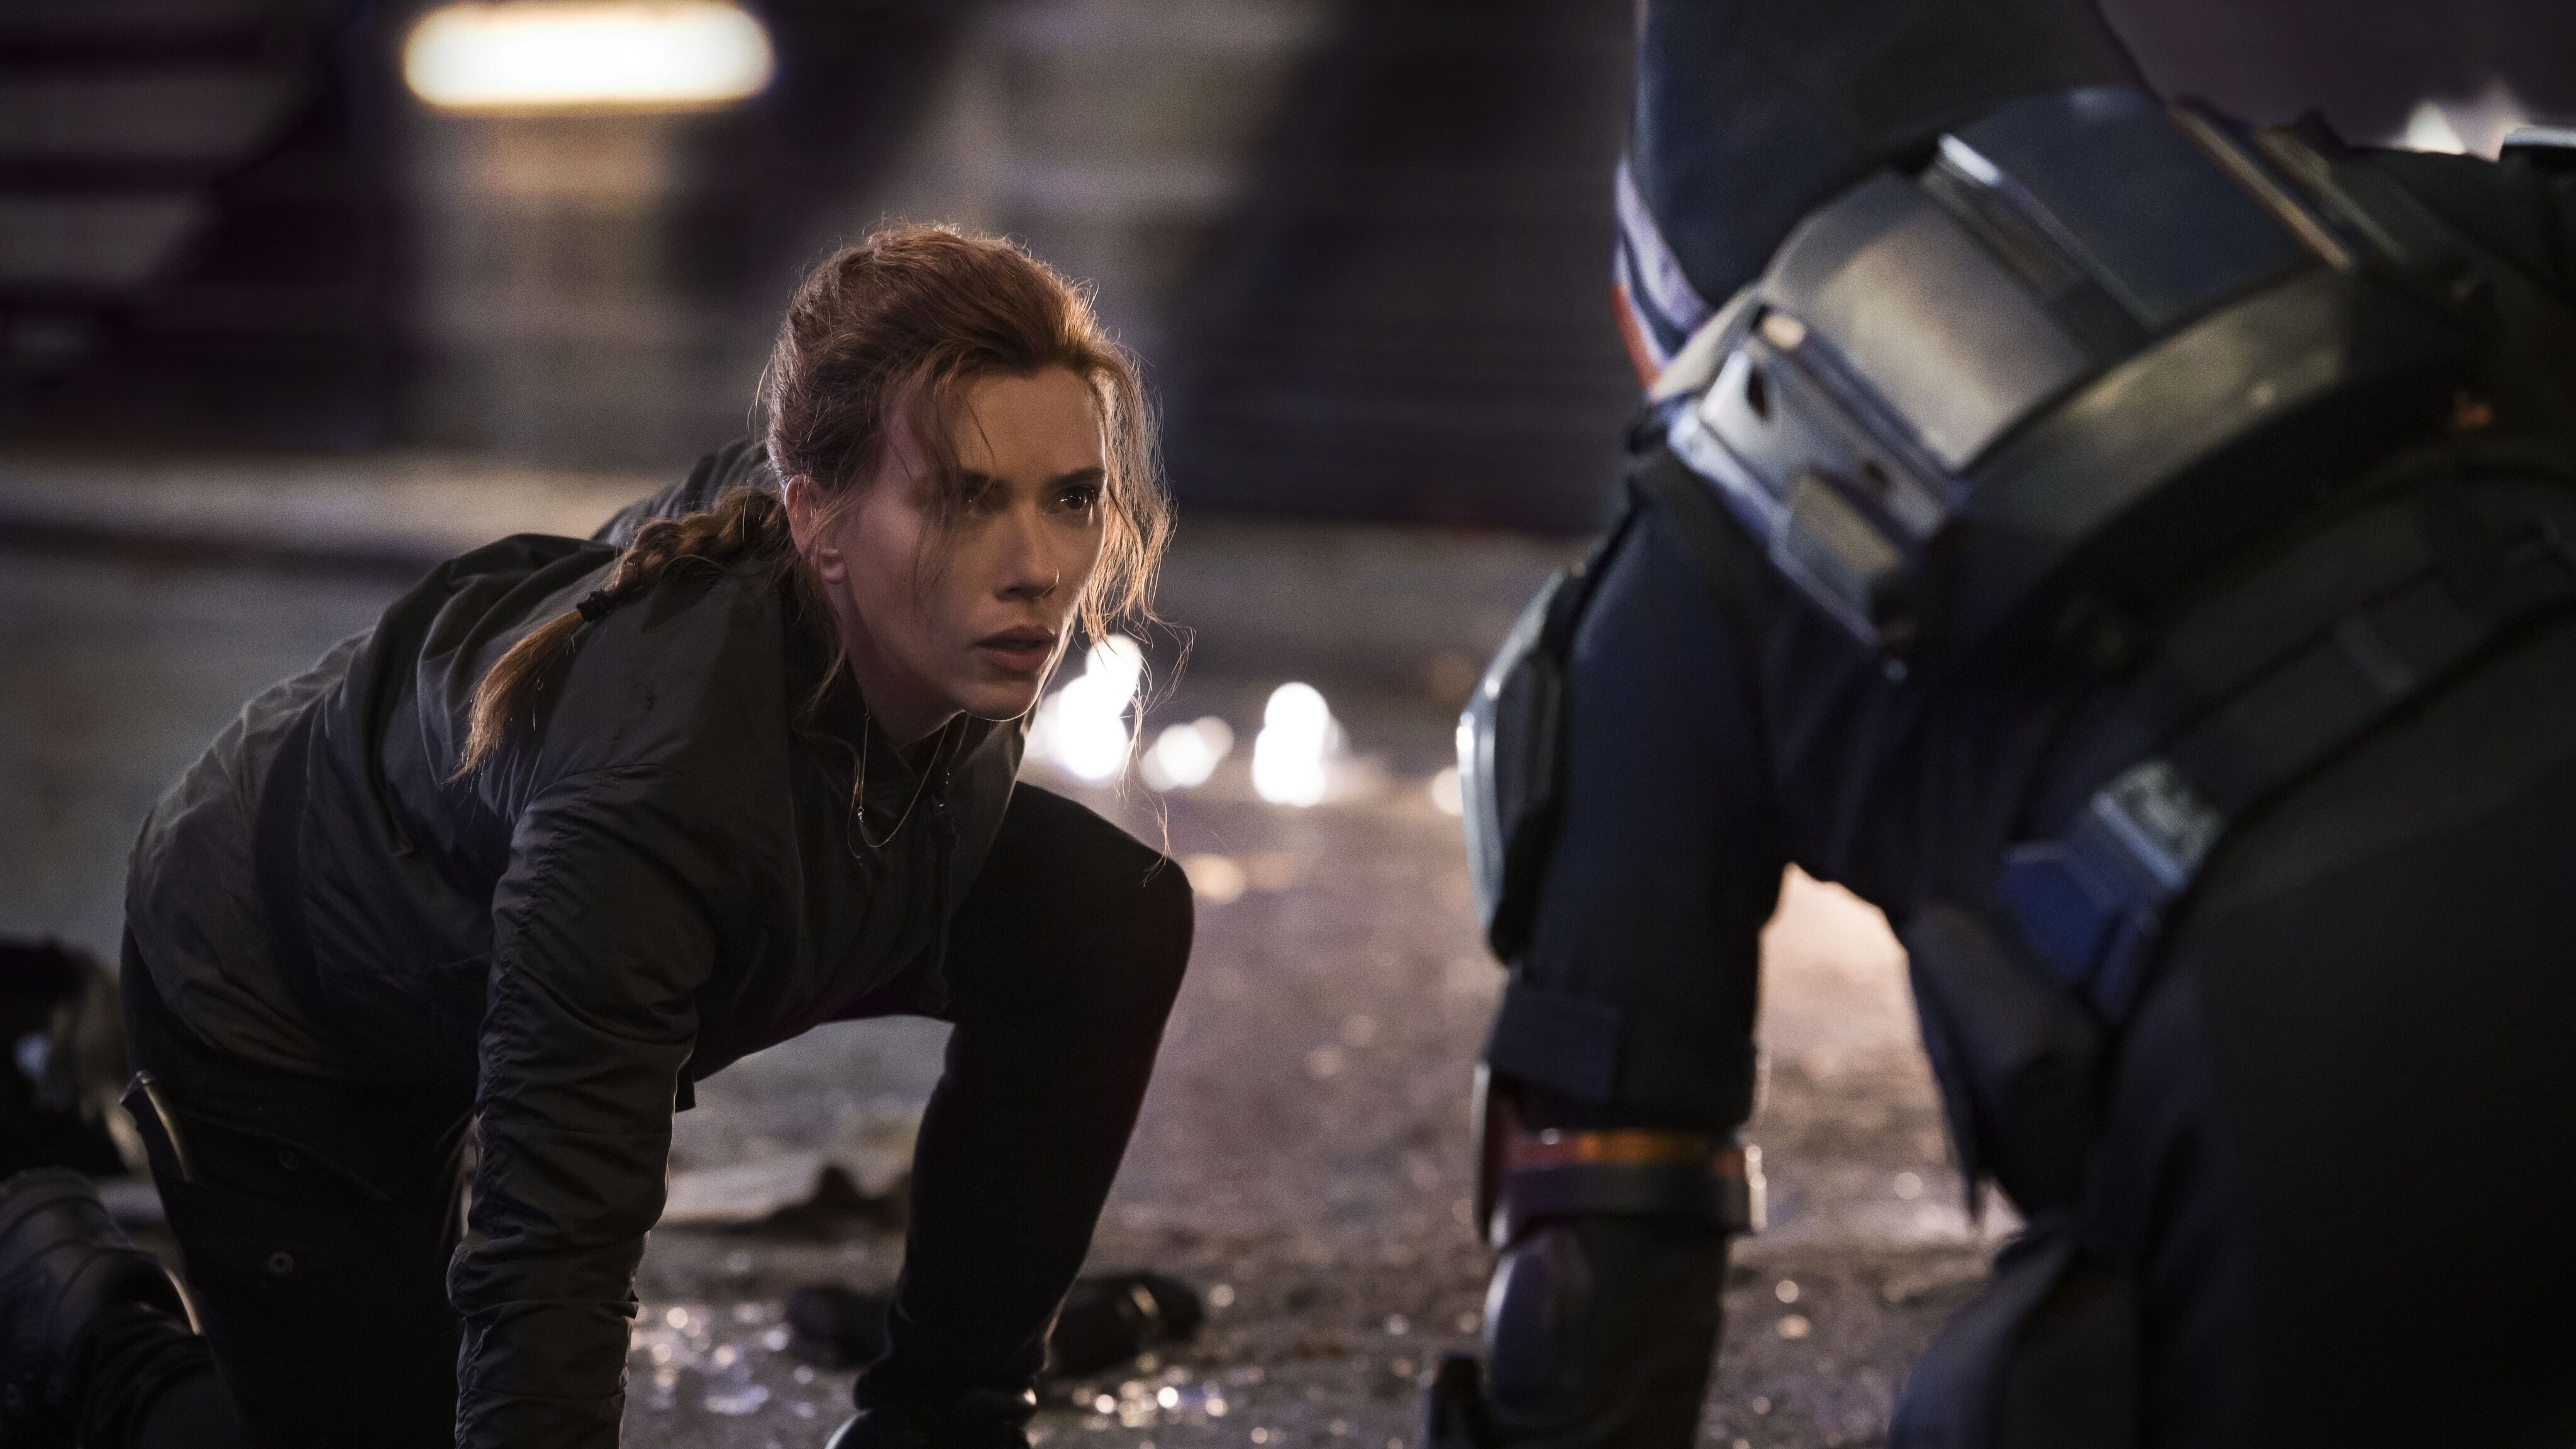 (L-R): Black Widow/Natasha Romanoff (Scarlett Johansson) and Taskmaster in Marvel Studios' BLACK WIDOW, in theaters and on Disney+ with Premier Access. Photo by Jay Maidment. ©Marvel Studios 2021. All Rights Reserved.